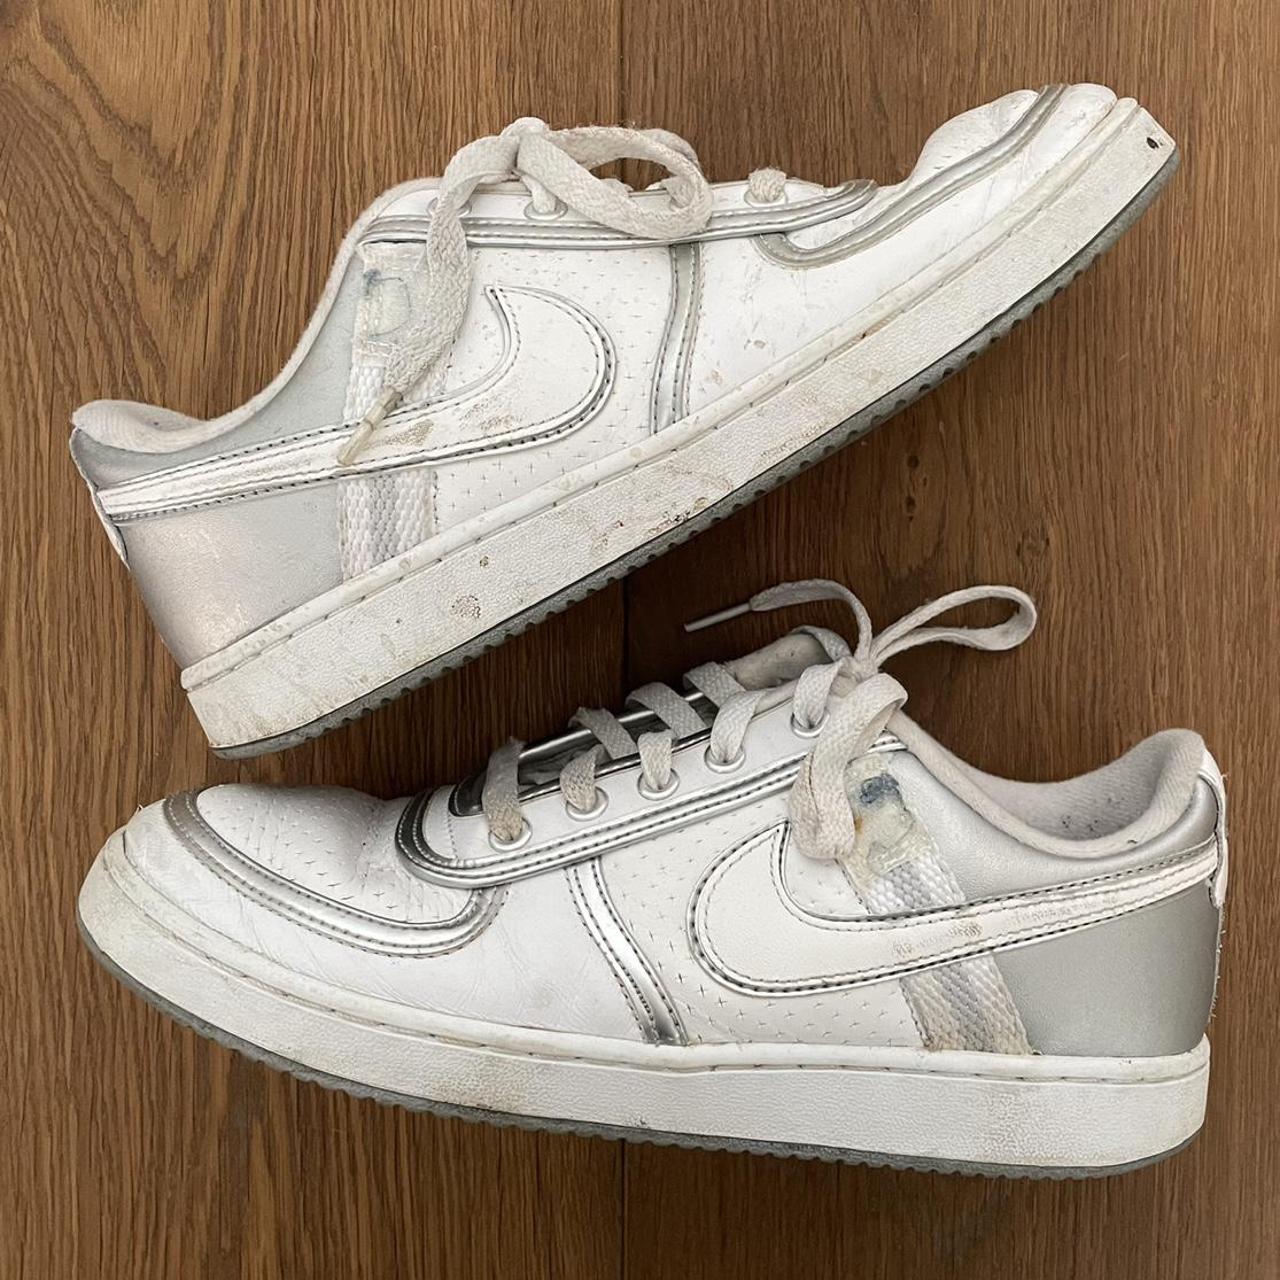 Product Image 1 - Nike Vandal Low silver and